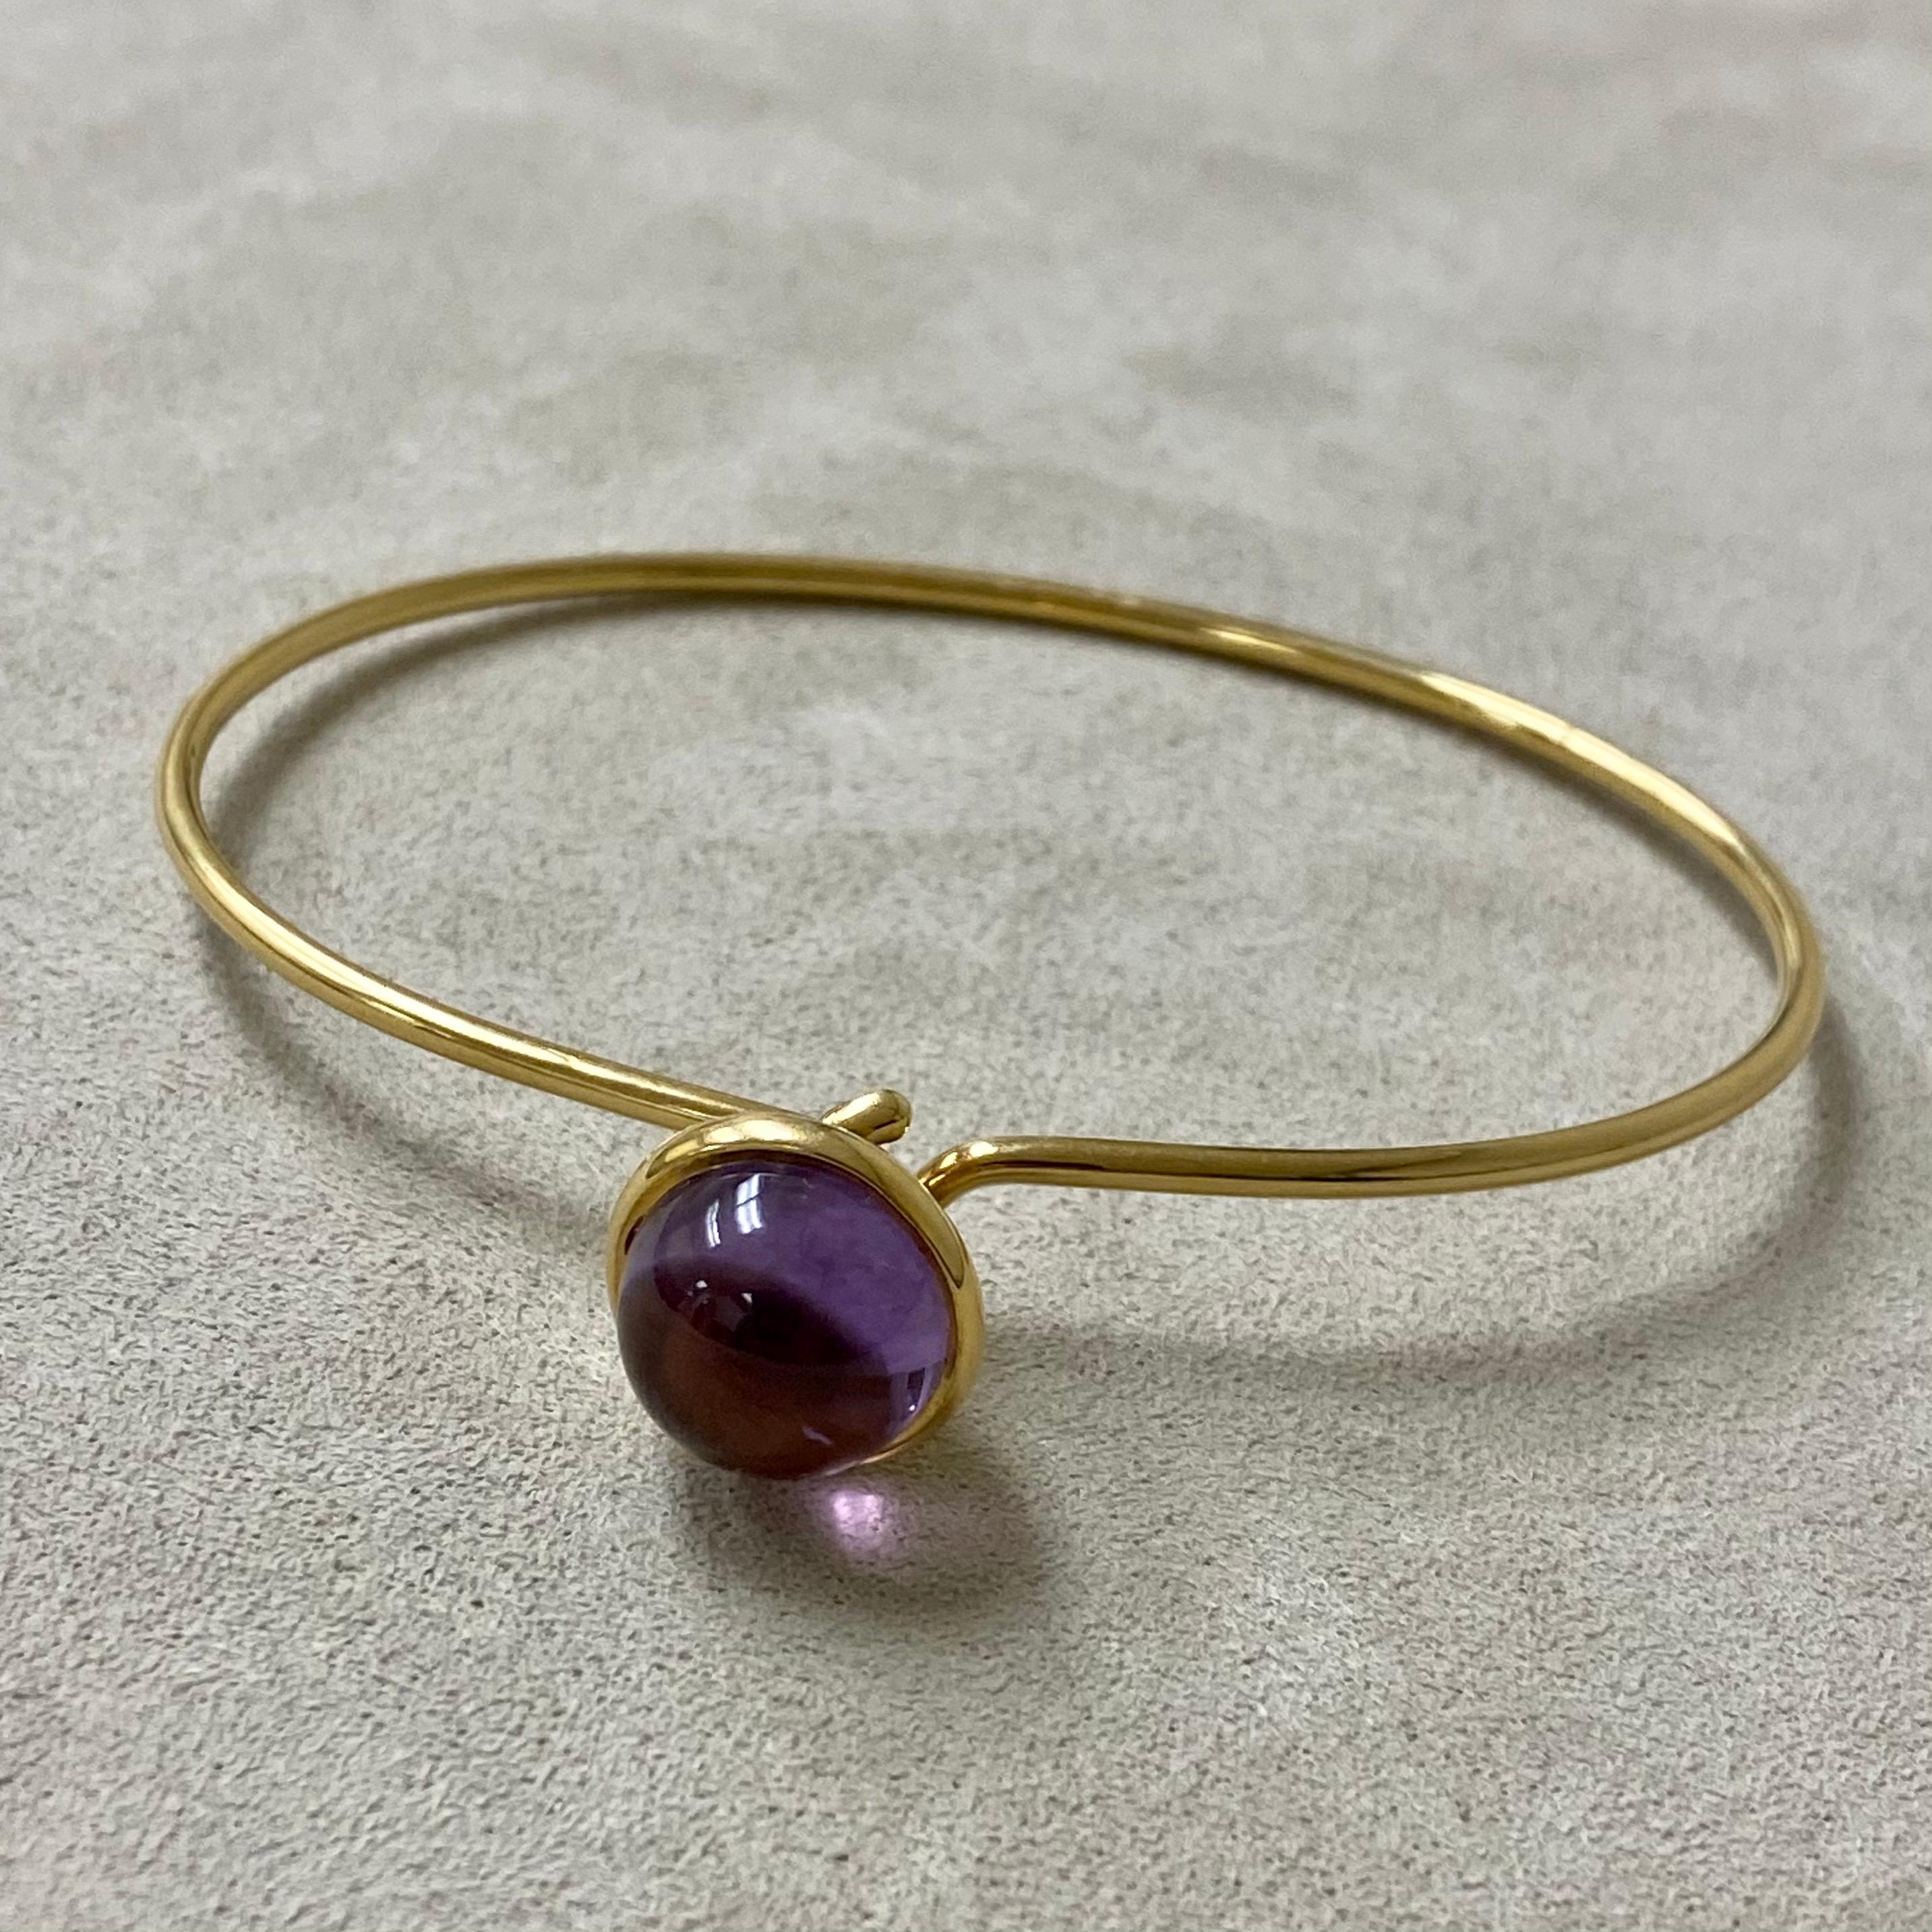 Created in 18kyg
Amethyst 7.5 carats approx.
Openable oval bracelet
Hidden mechanism to open under bauble

Exquisitely fashioned from 18-karat yellow gold, the Candy Large Stacking Baubles Bracelet is adorned with an amethyst of approximatly 7.5